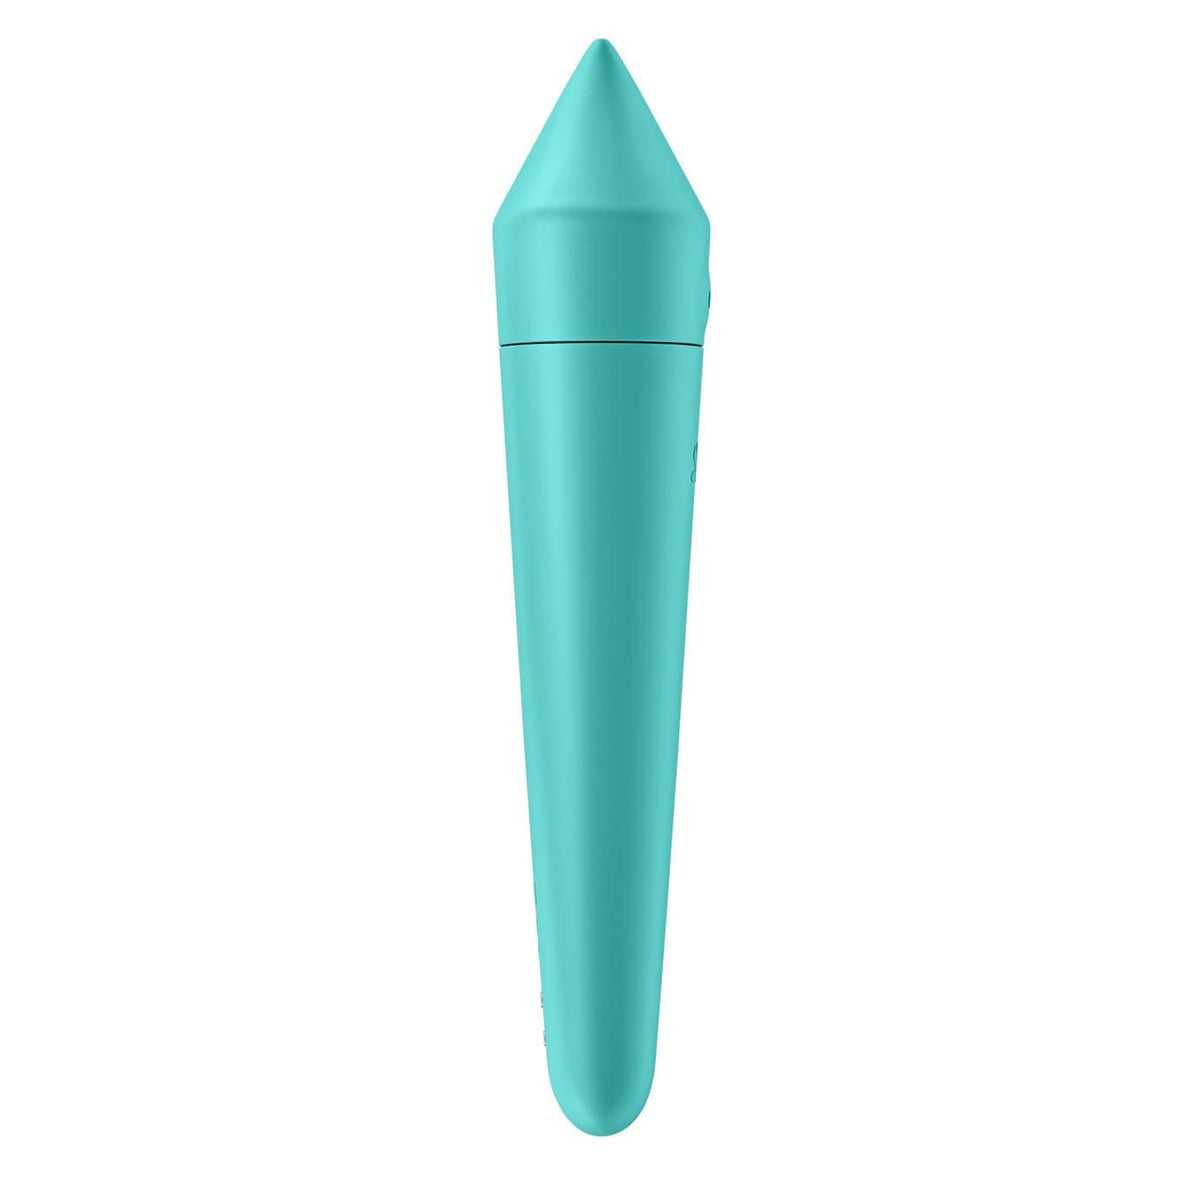 Satisfyer - Ultra Power Bullet 8 Vibrator with Bluetooth and App (Turquoise)    Bullet (Vibration) Rechargeable